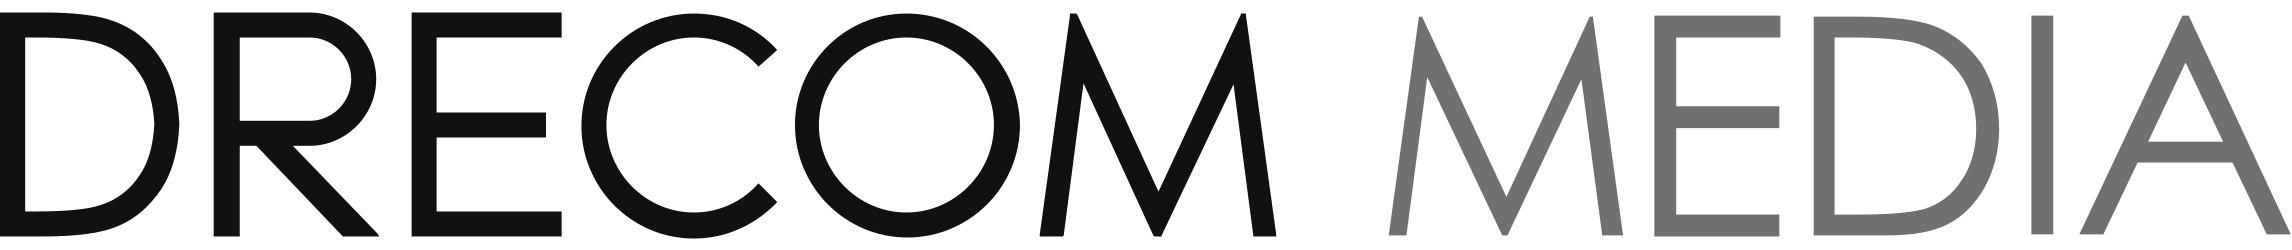 The Drecom Media Logo. Its a basic Logo with Drecom written in black and Media written in grey.